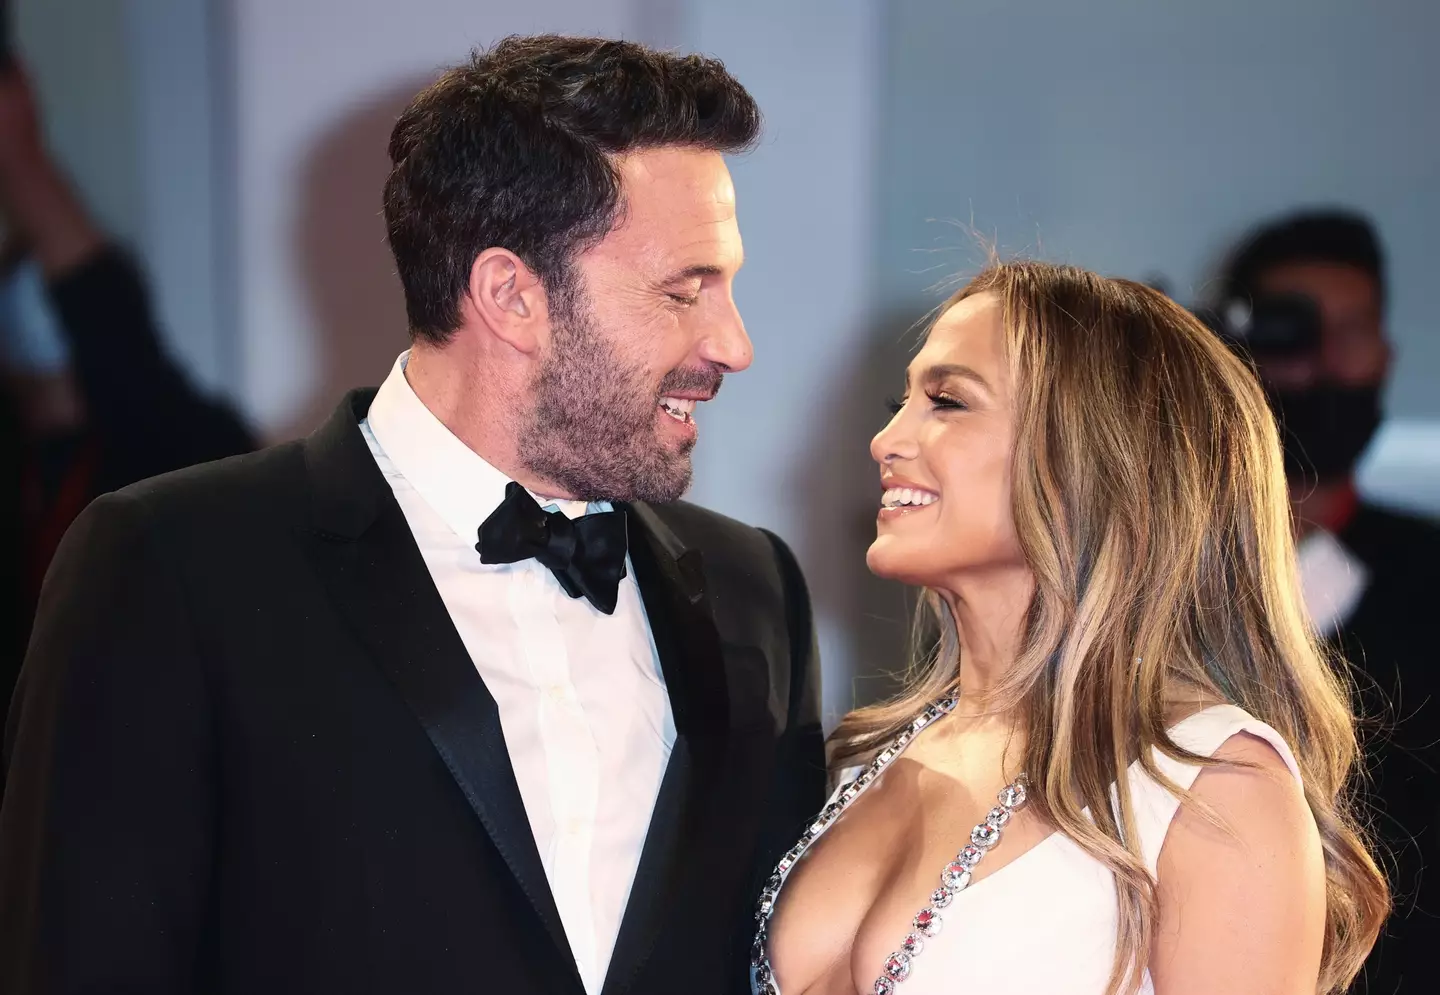 Affleck and Lopez have rekindled their romance.